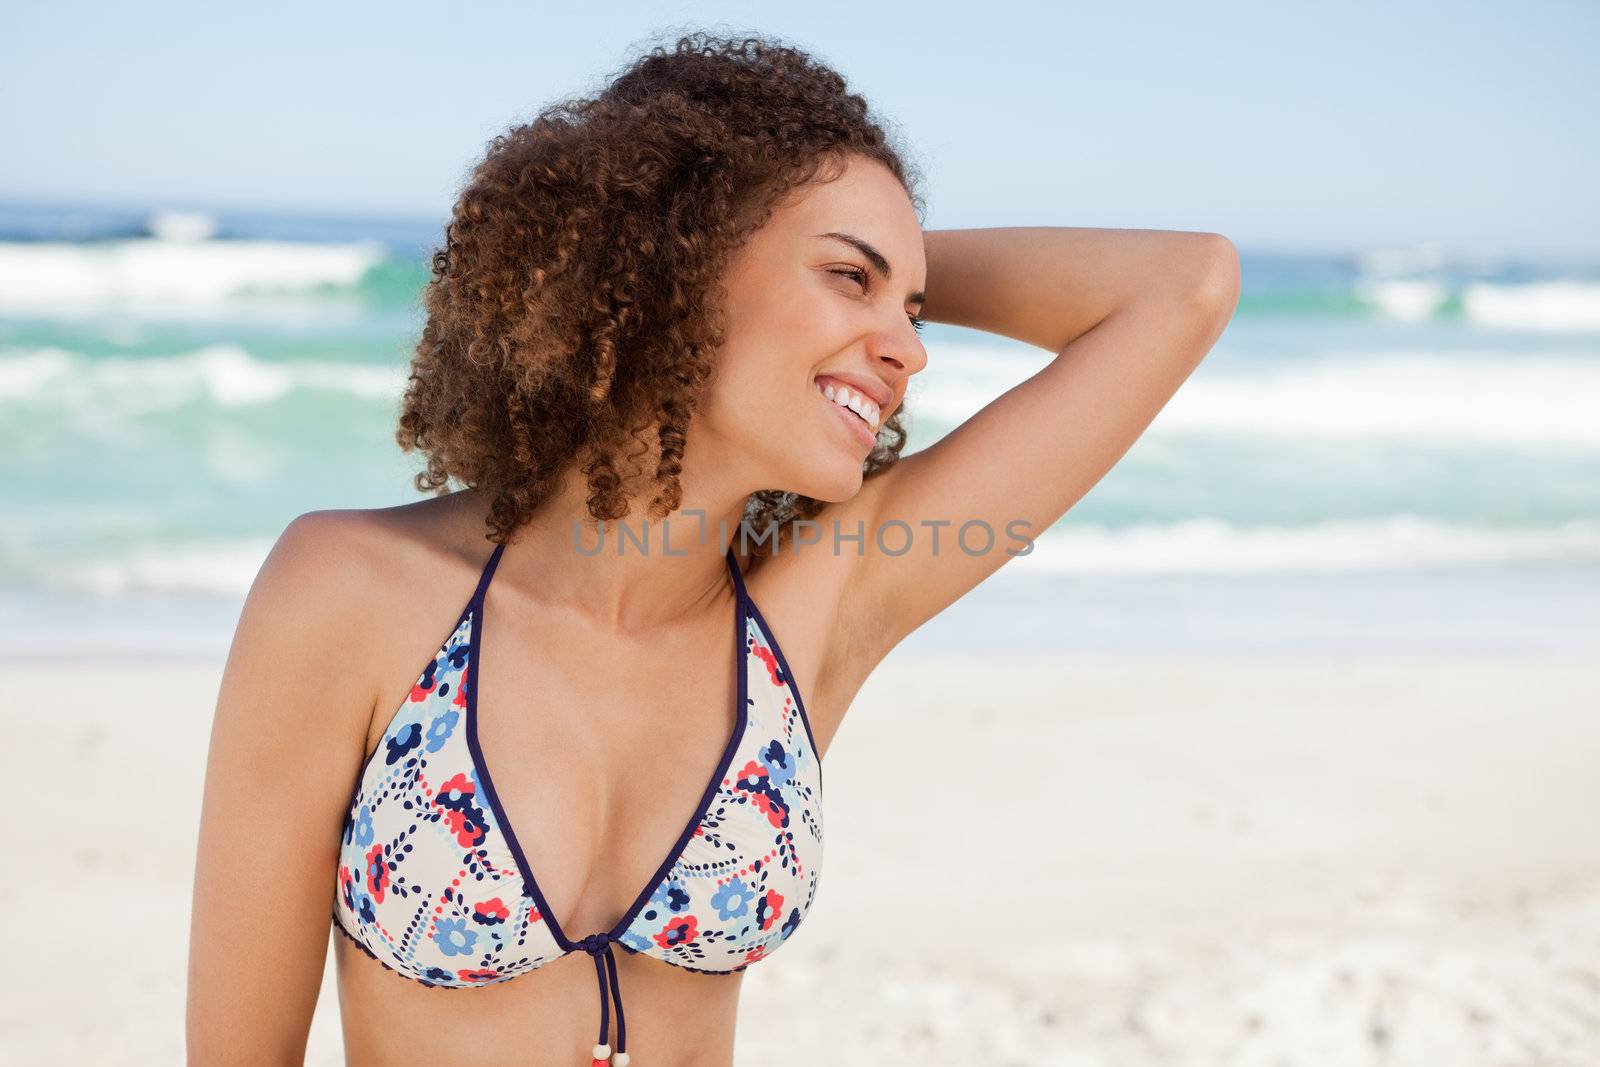 Young woman placing her hand on her hair while wearing a swimsuit on the beach